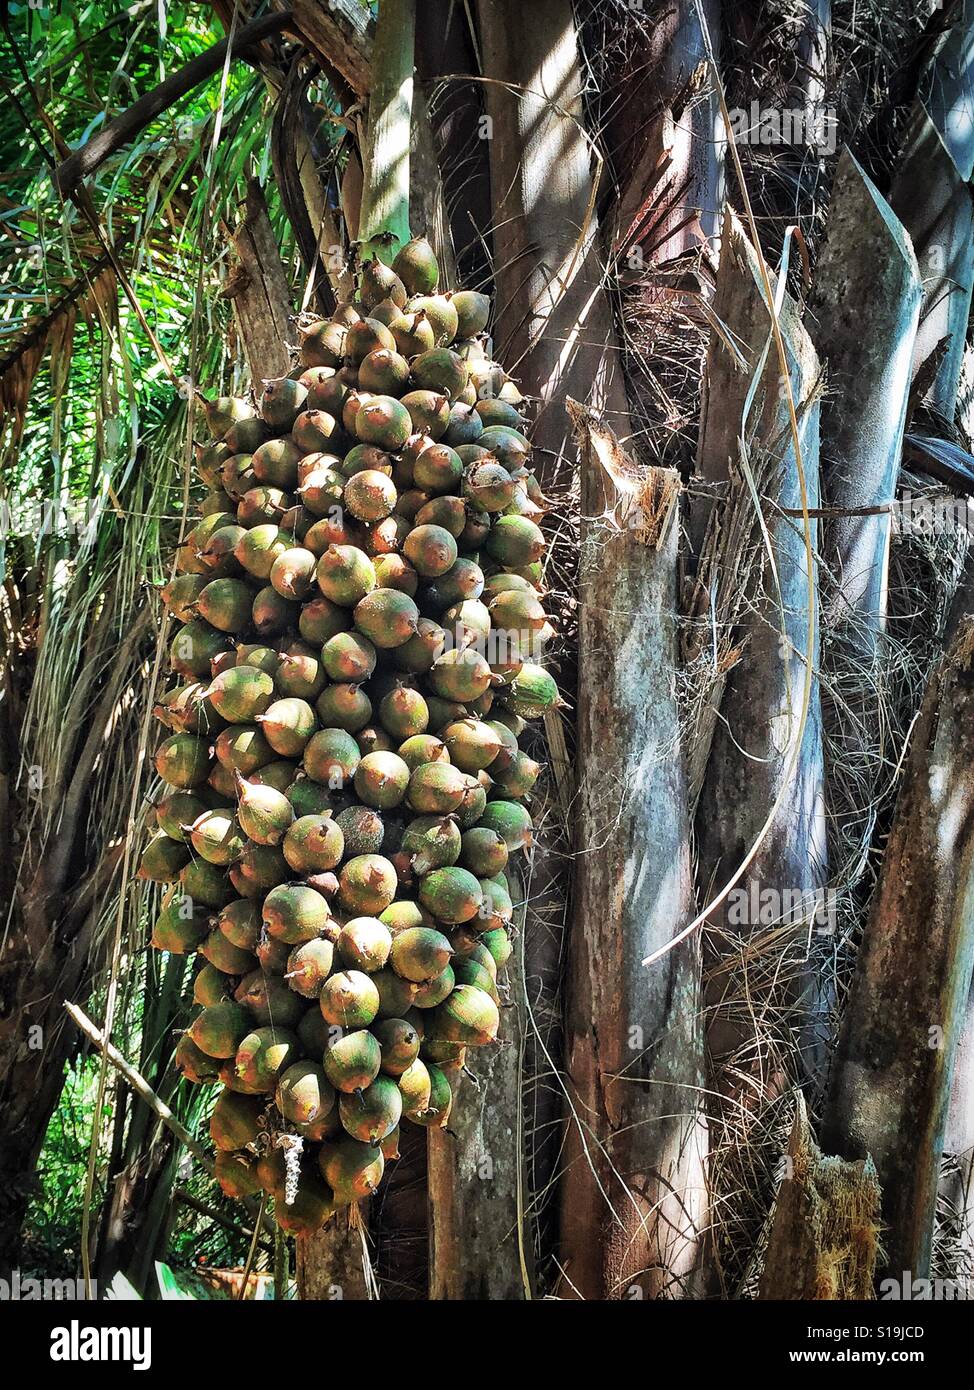 A large cluster of nuts hangs from a Cohune Palm tree, also known as Attalea Cohune or American oil palm. Stock Photo